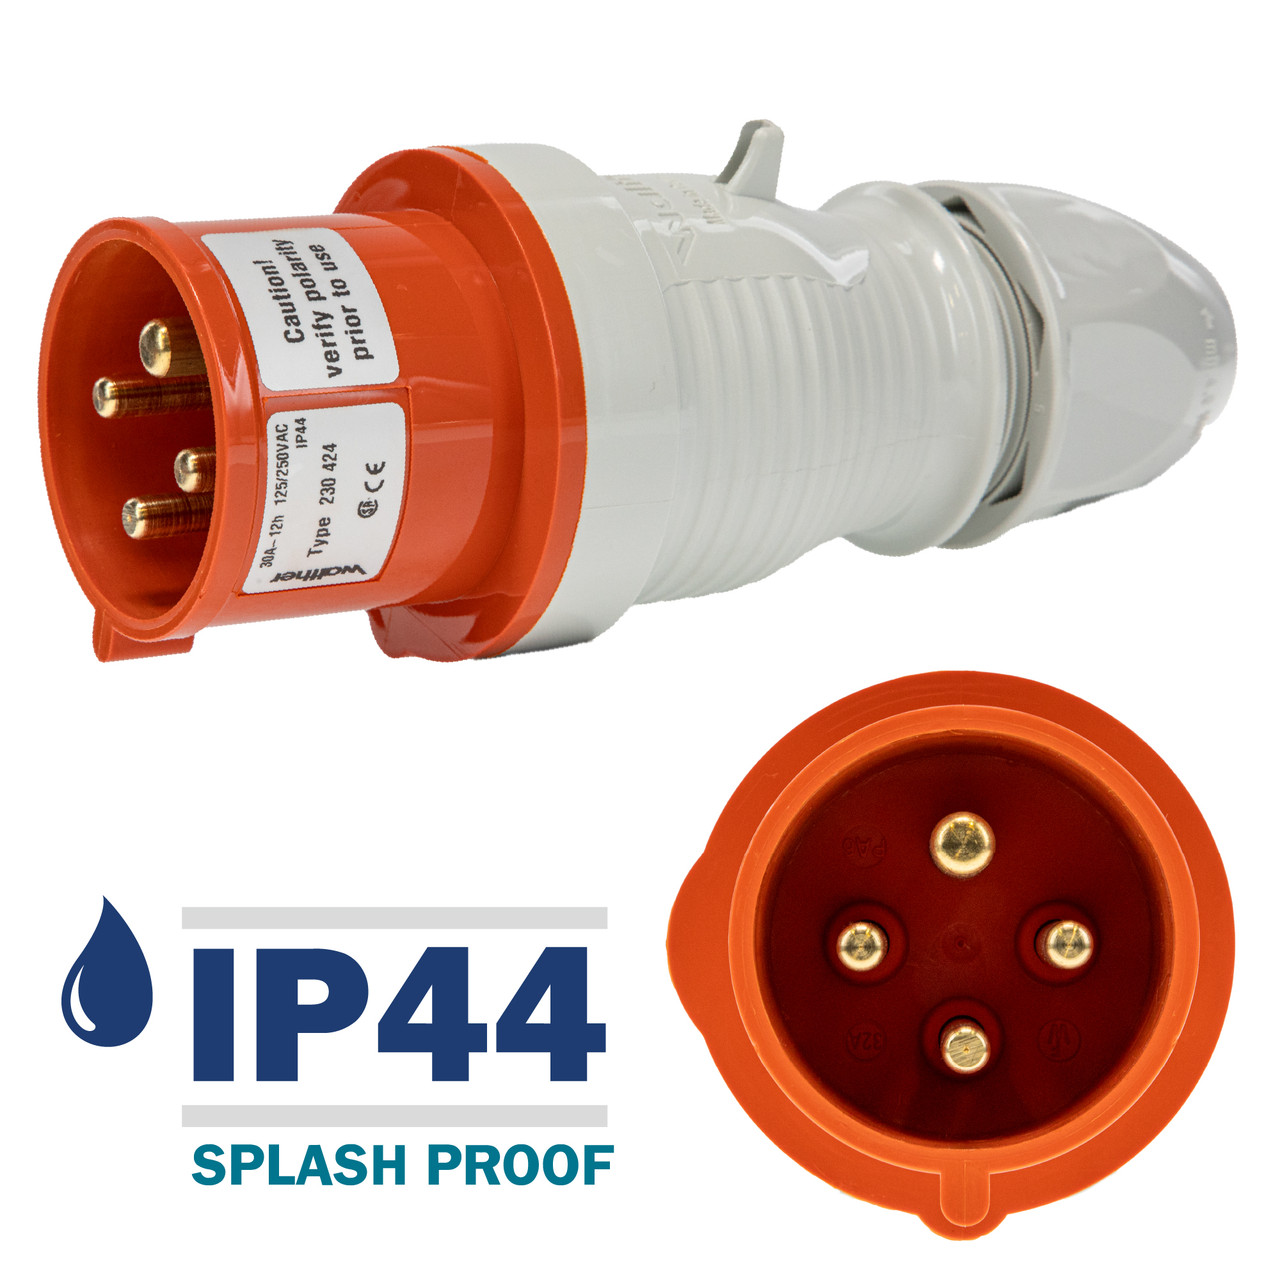 Walther Electric 230424 Pin and Sleeve Plug 30A 4 Wire 125/250 VAC 12Hr IP44 Splashproof - 430P12 Industrial Grade IEC (Orange)